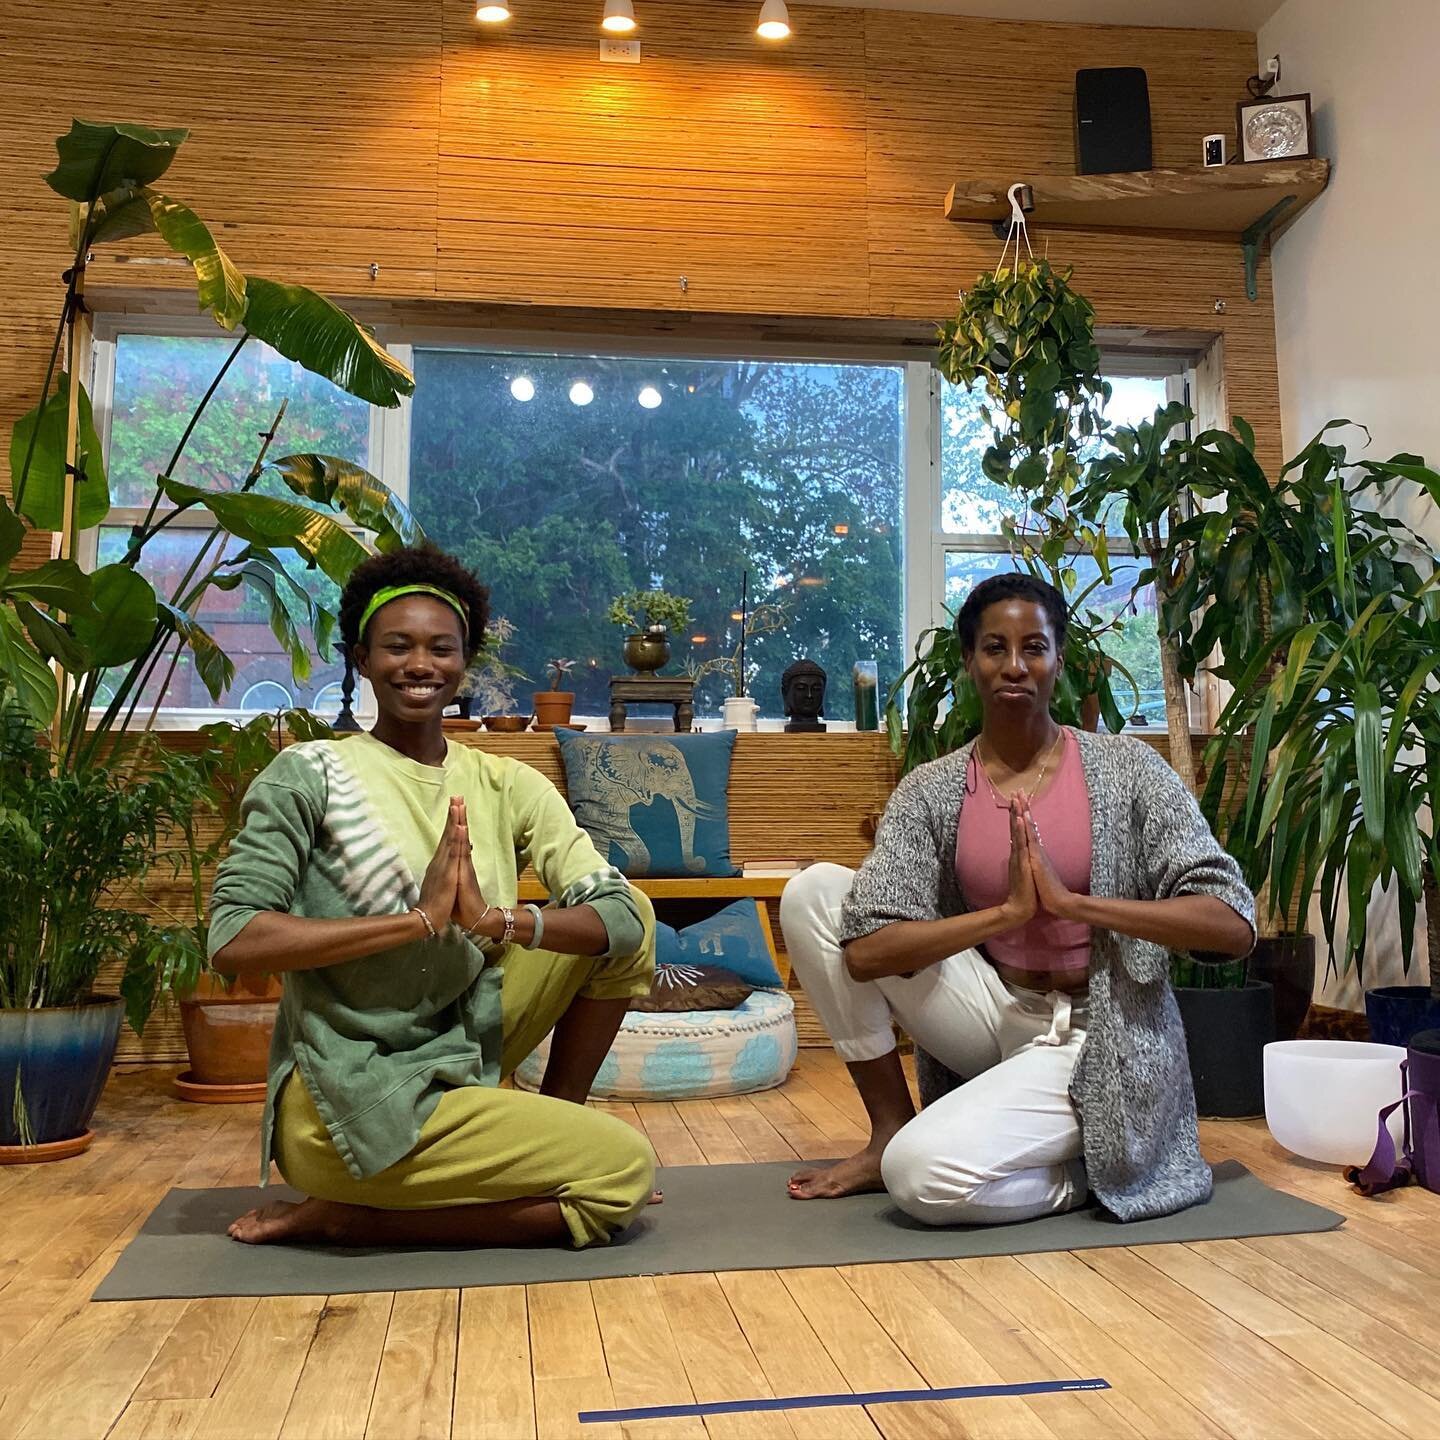 On Mondays we practice Kemetic yoga!

@jusna_ninah joined us for Kemetic yoga for the first time and she says &ldquo;My first kemetic practice was pure bliss. Intentional, slow movement to breath, fostered a feeling of connection to my body and to th